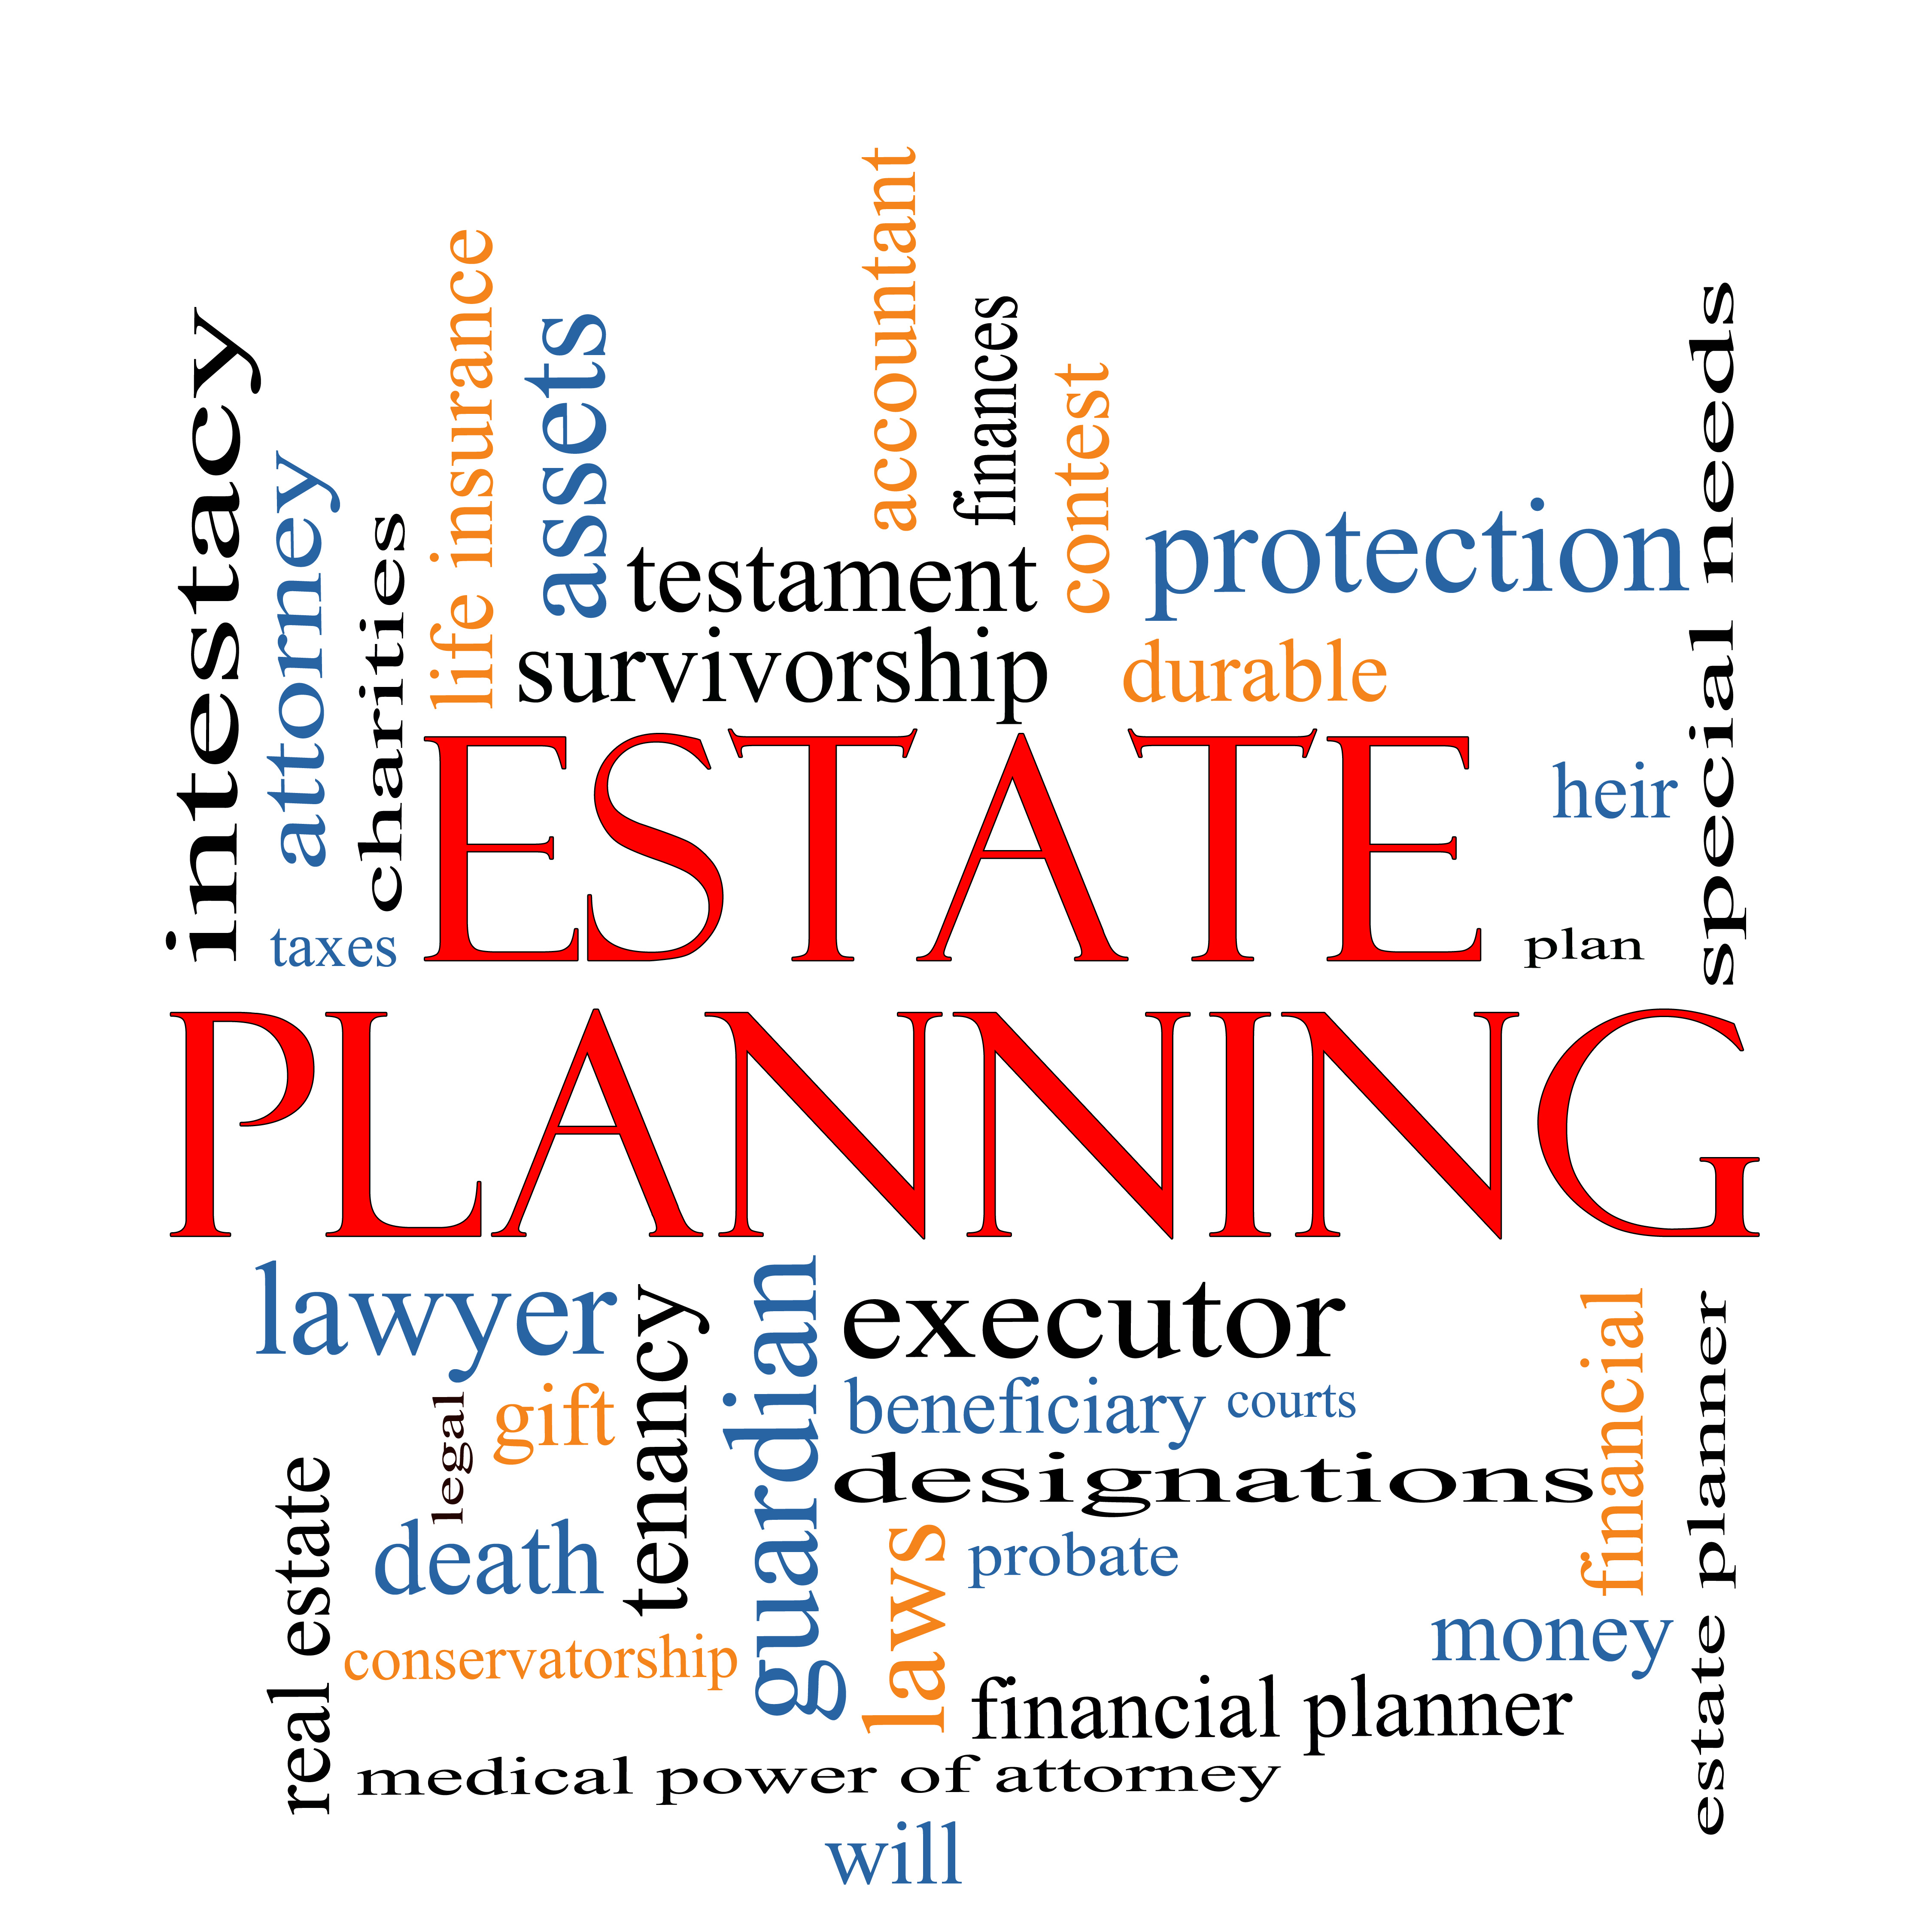 Estate Planning Word Cloud Concept with great terms such as , tenancy, durable, will, financials, lawyer, executor, probate and more.